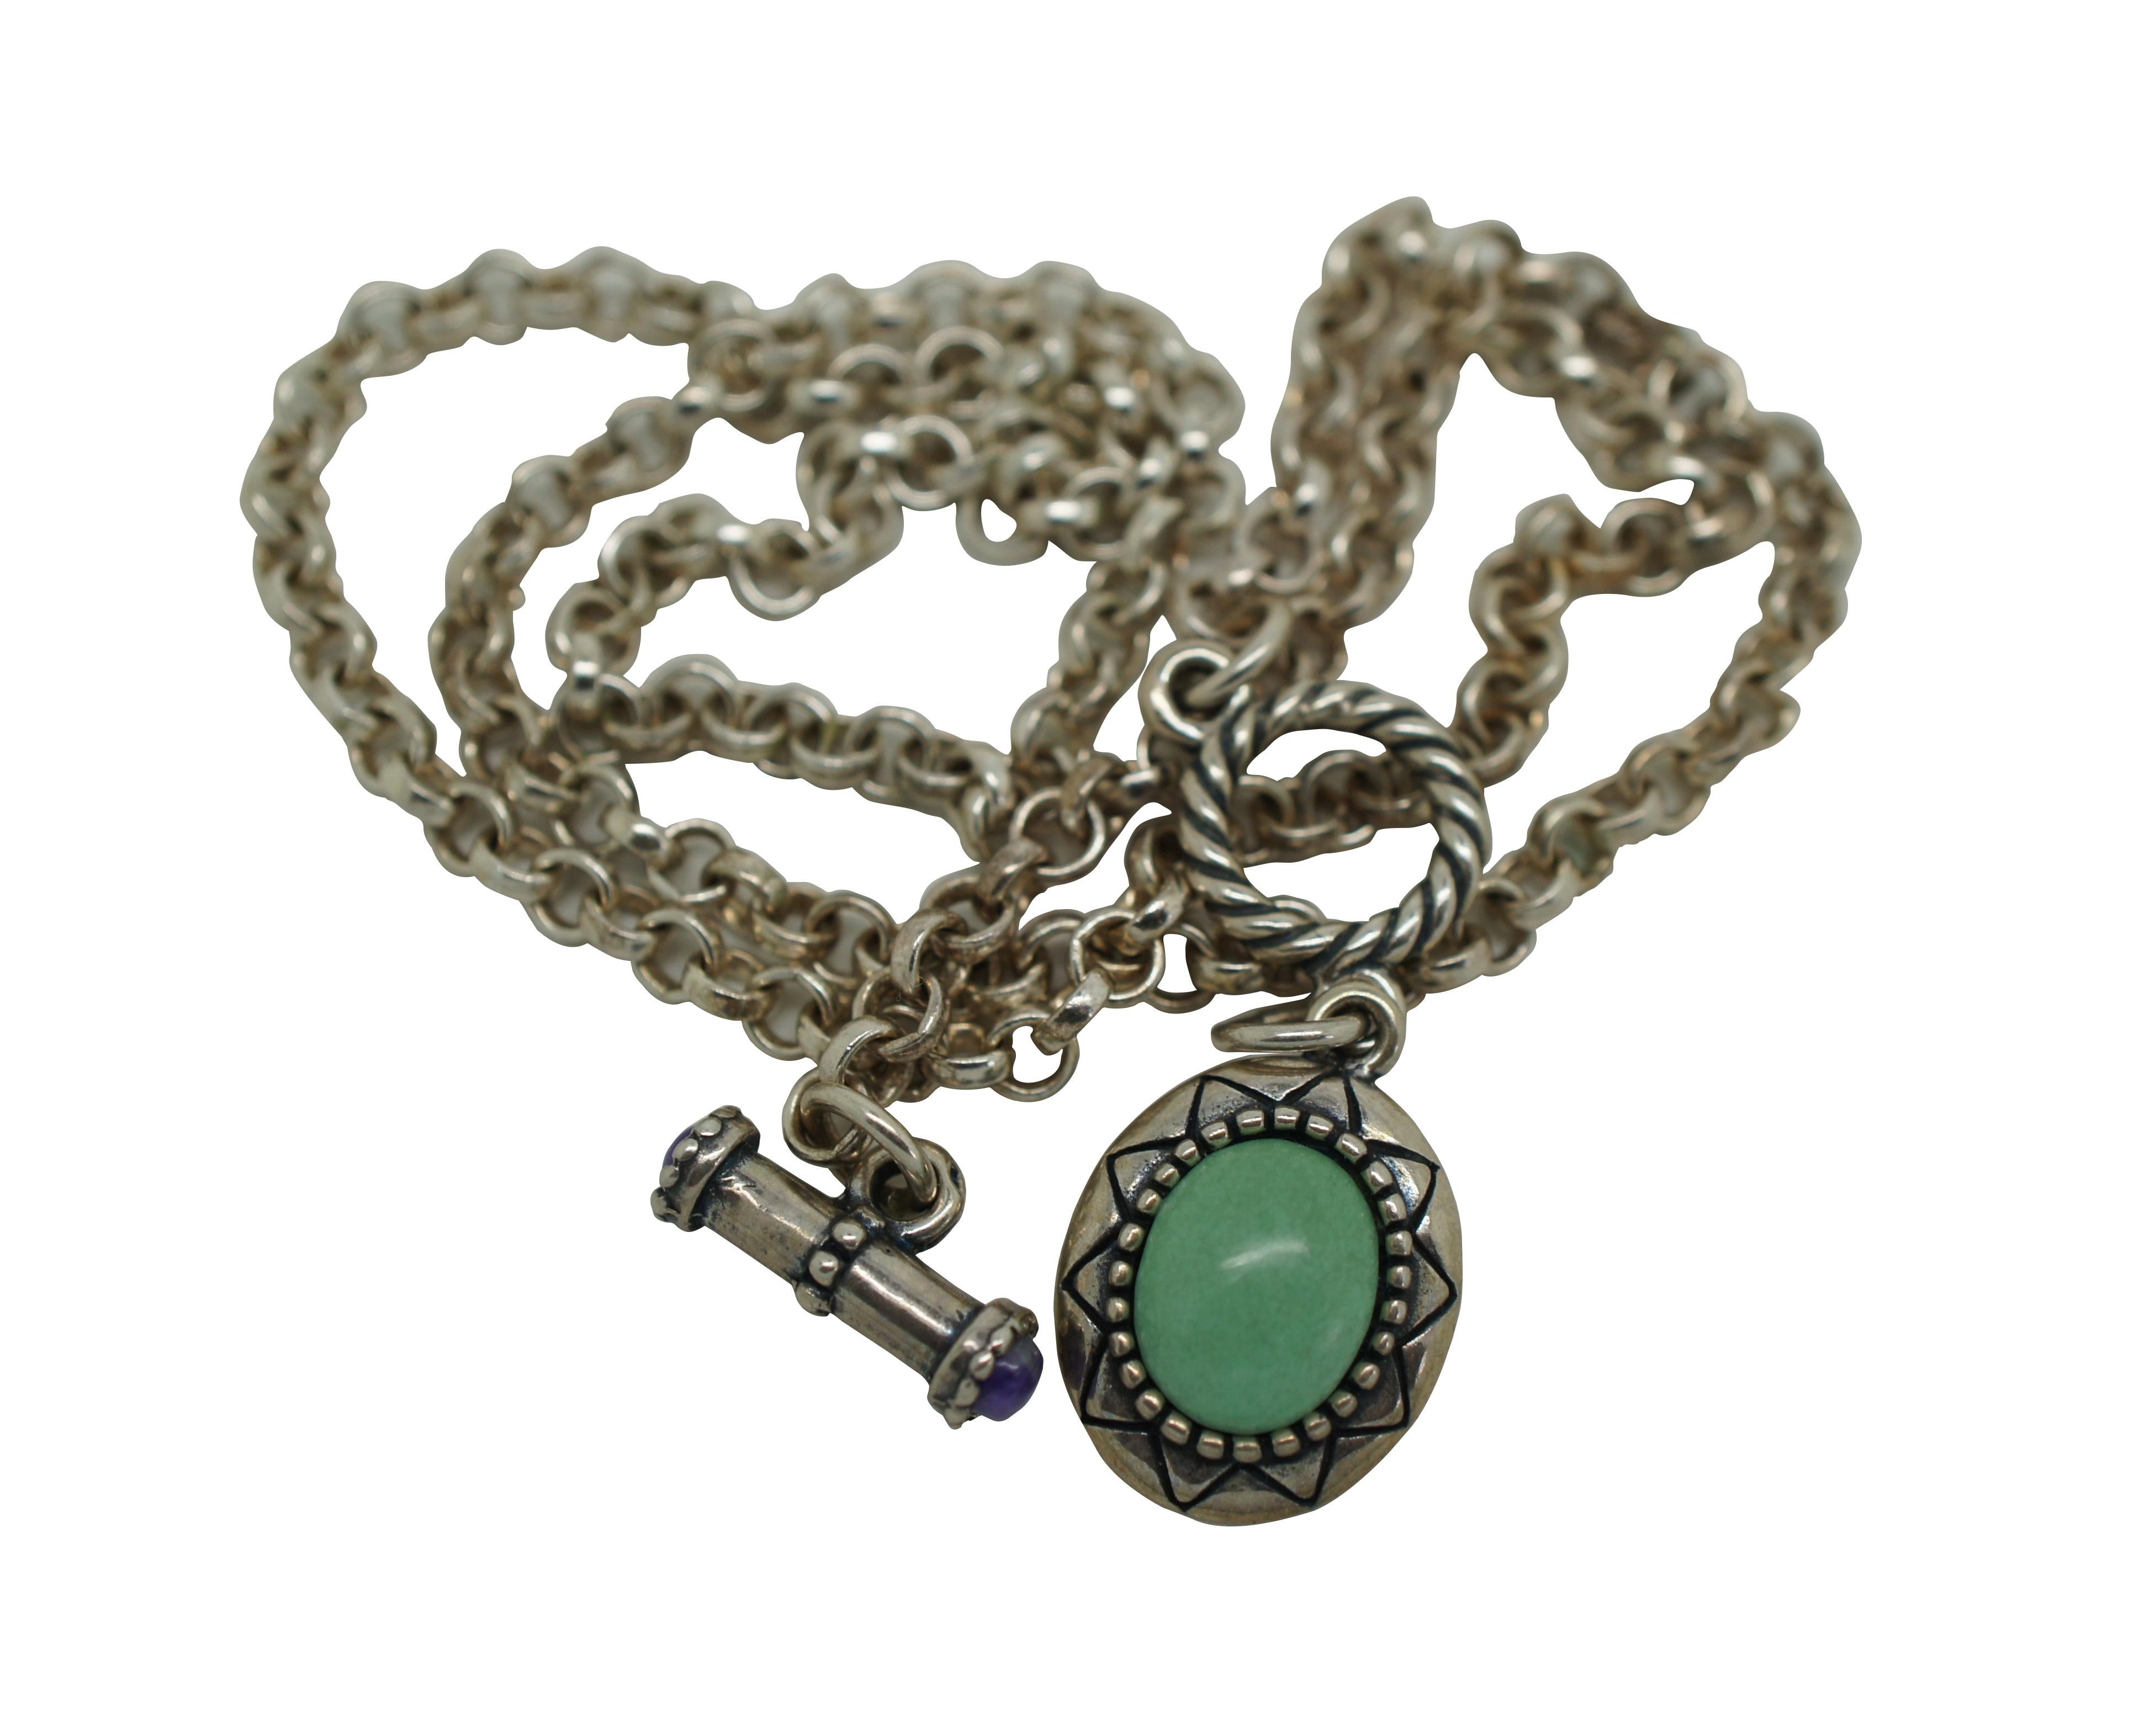 Native American Vintage Southwestern Turquoise Amethyst Sterling Silver 925 Necklace 16g